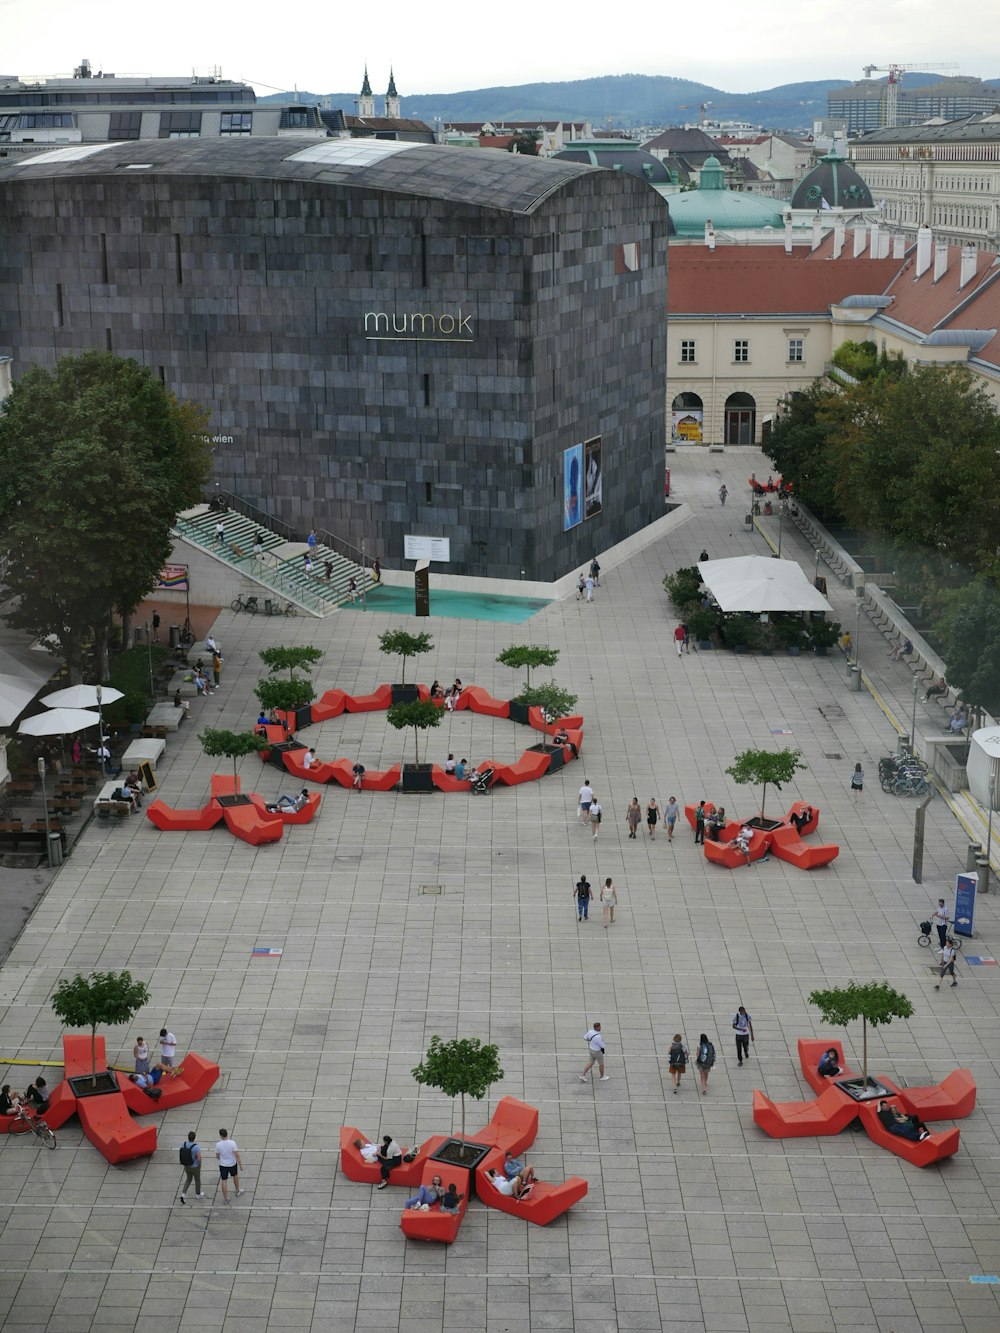 a courtyard with a building and people